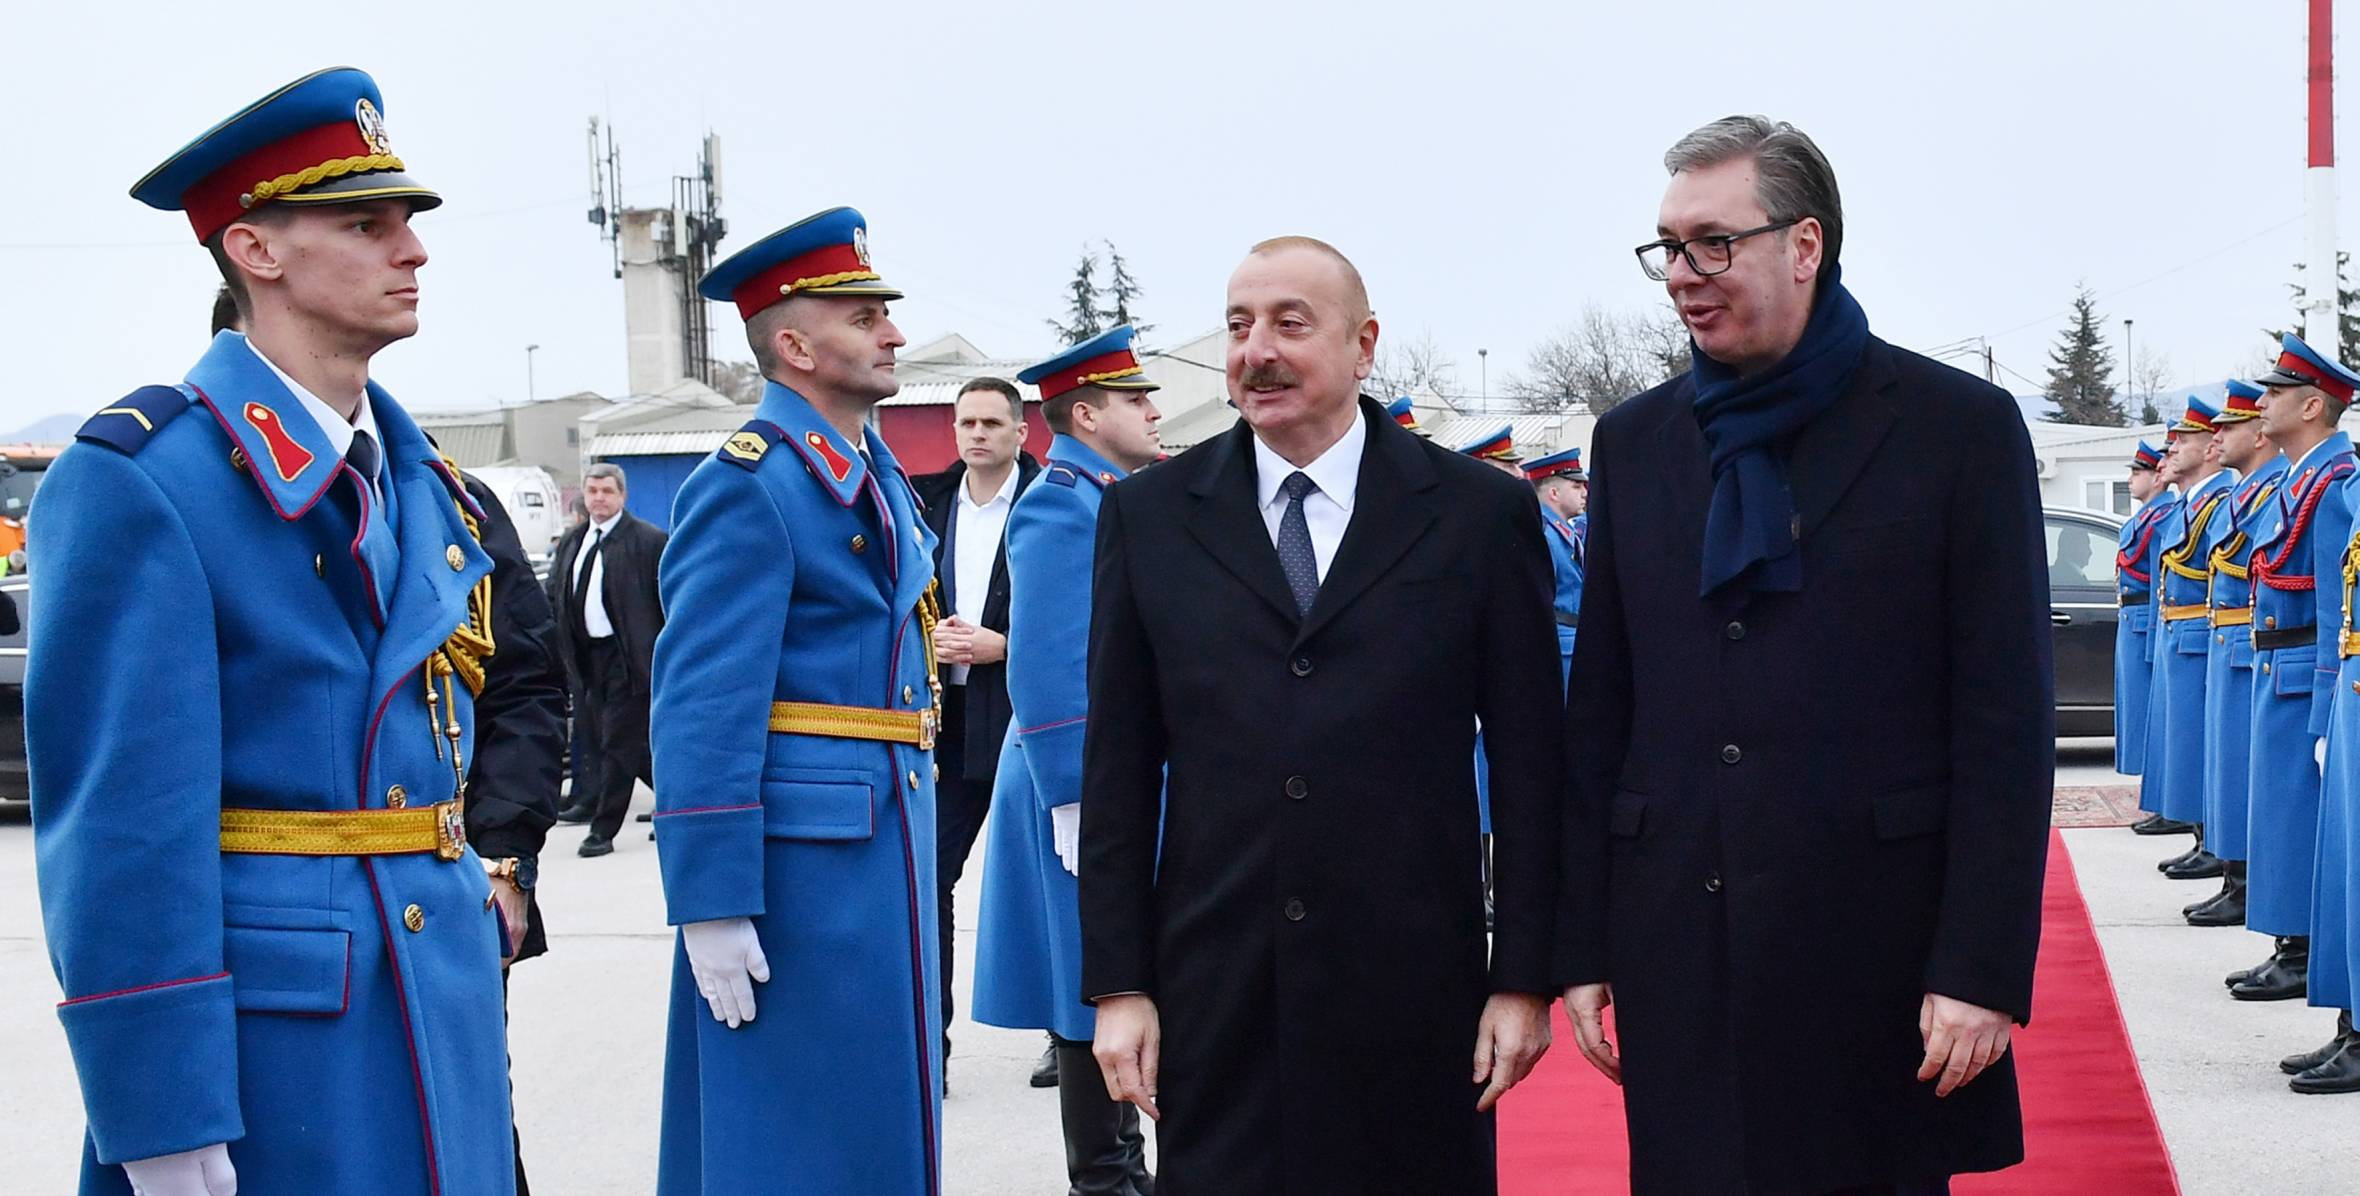 Ilham Aliyev concluded his visit to Serbia